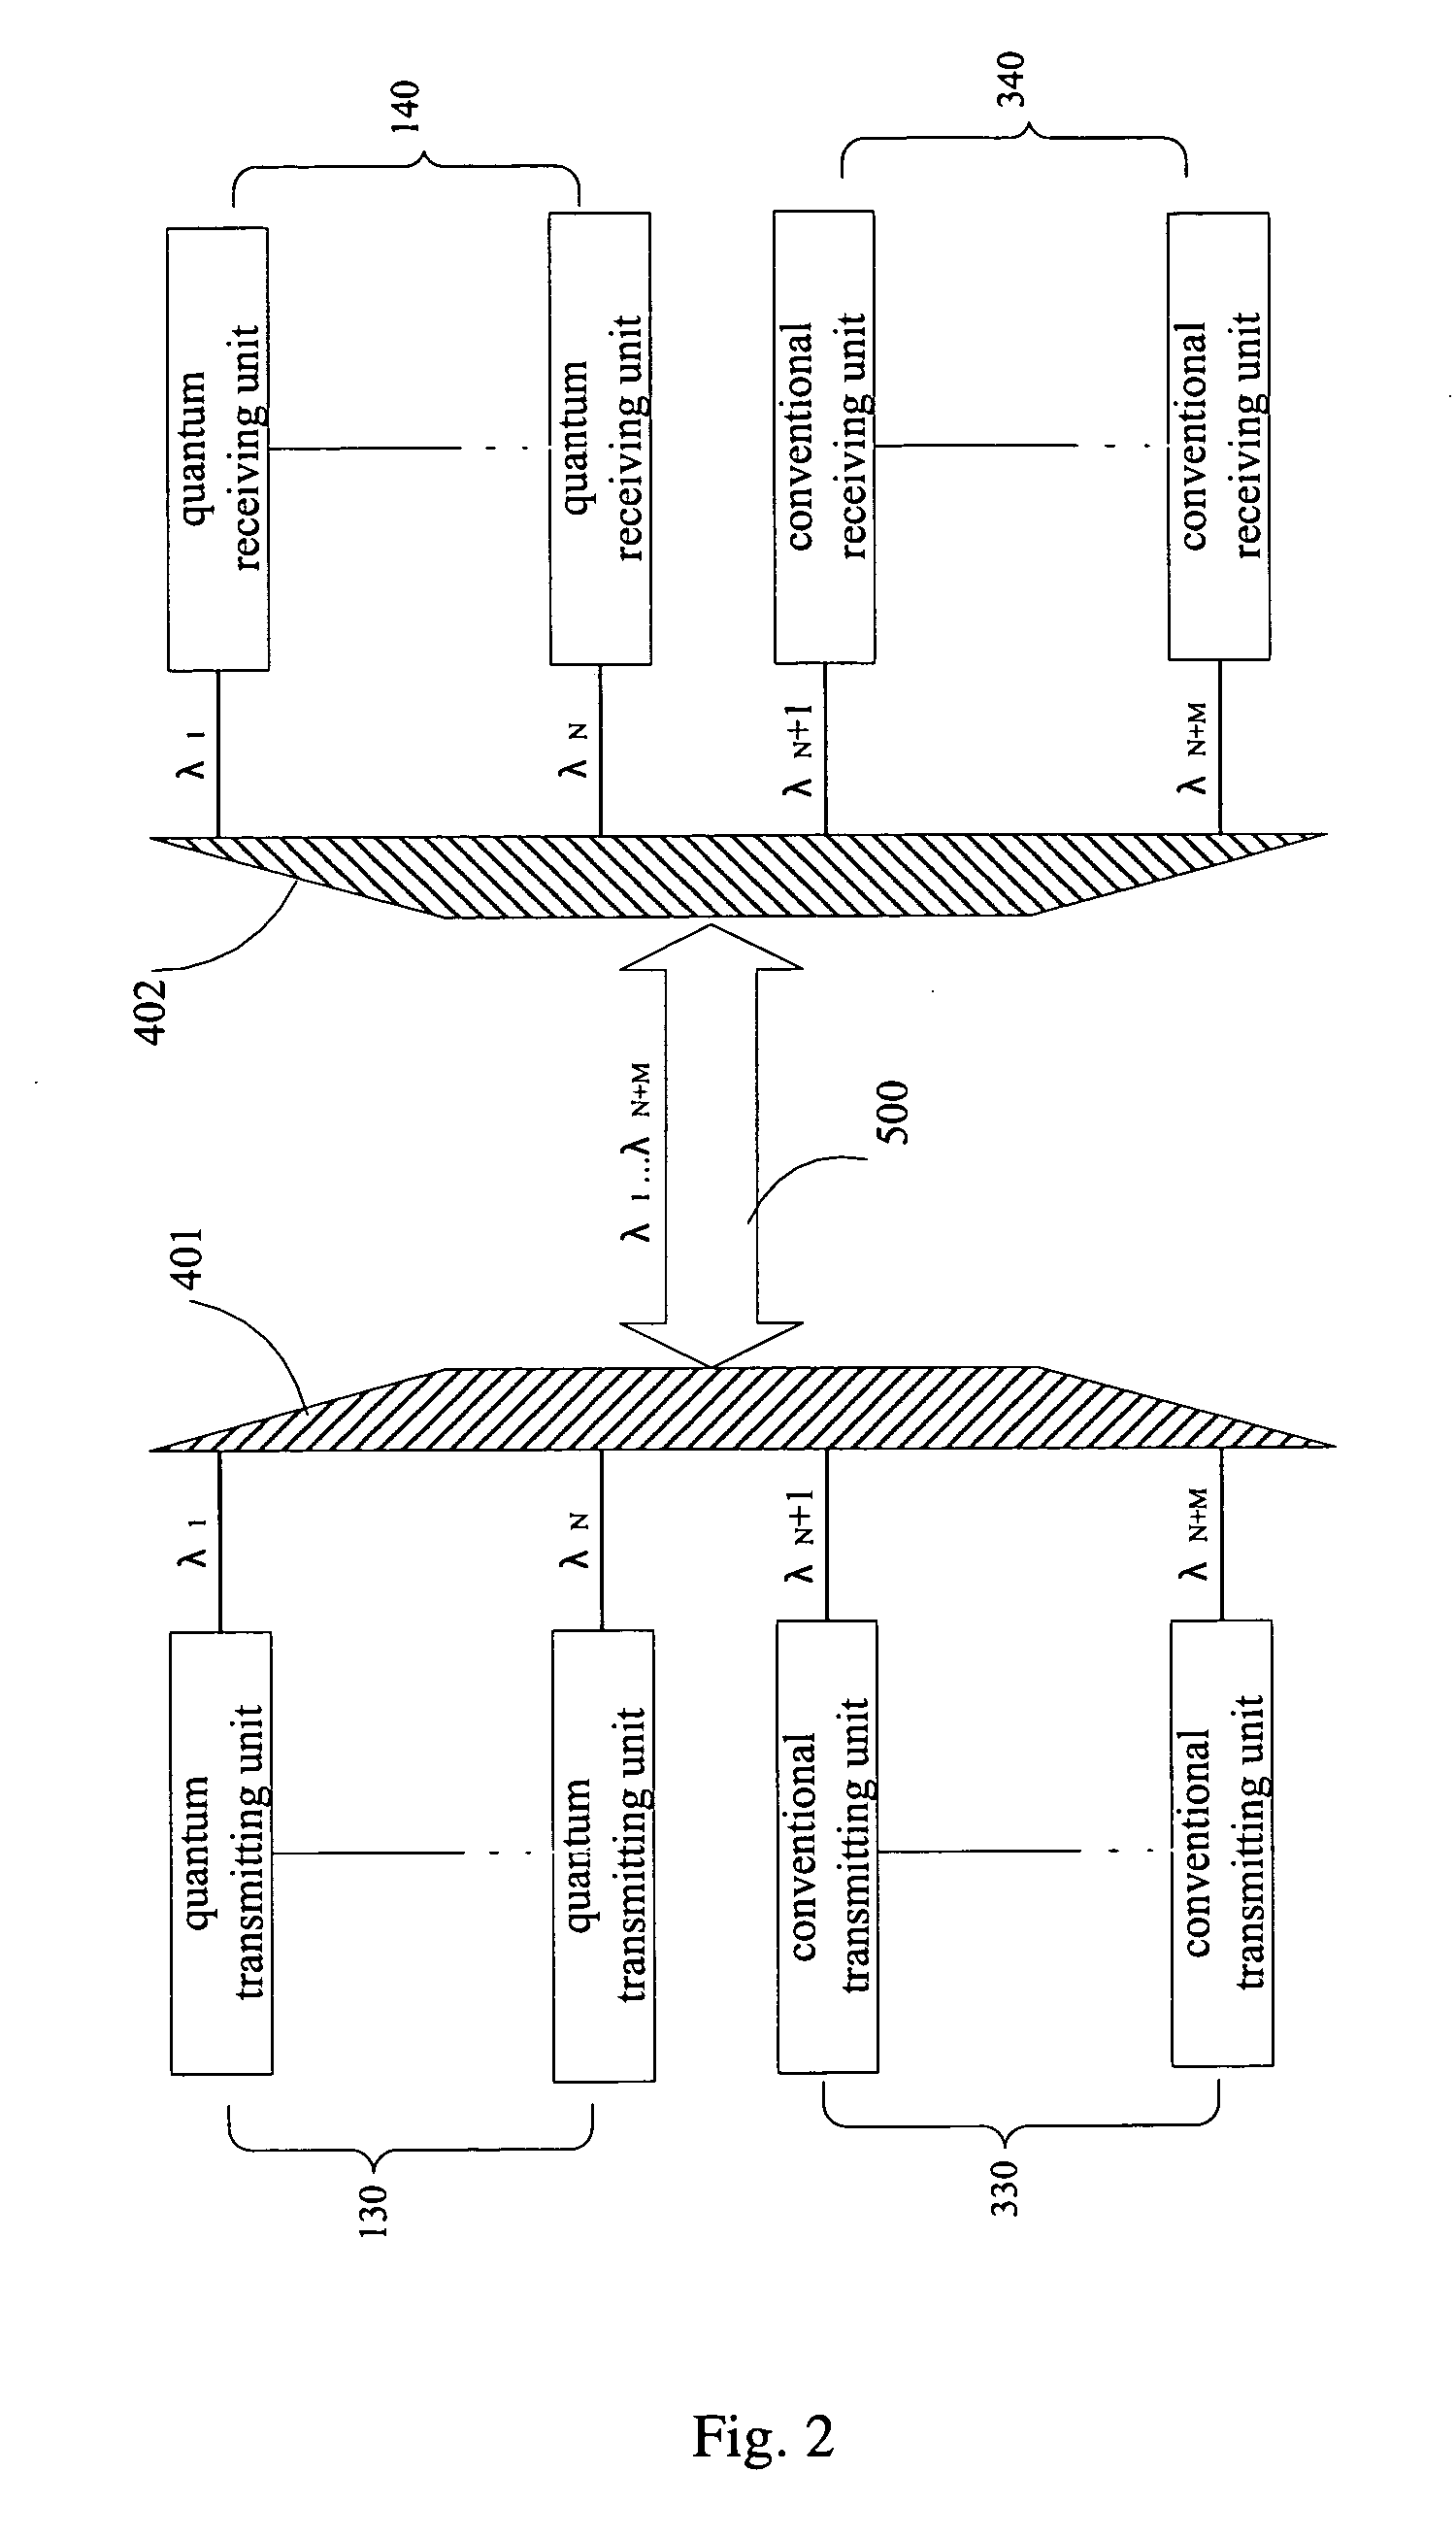 System and methods for quantum key distribution over WDM links